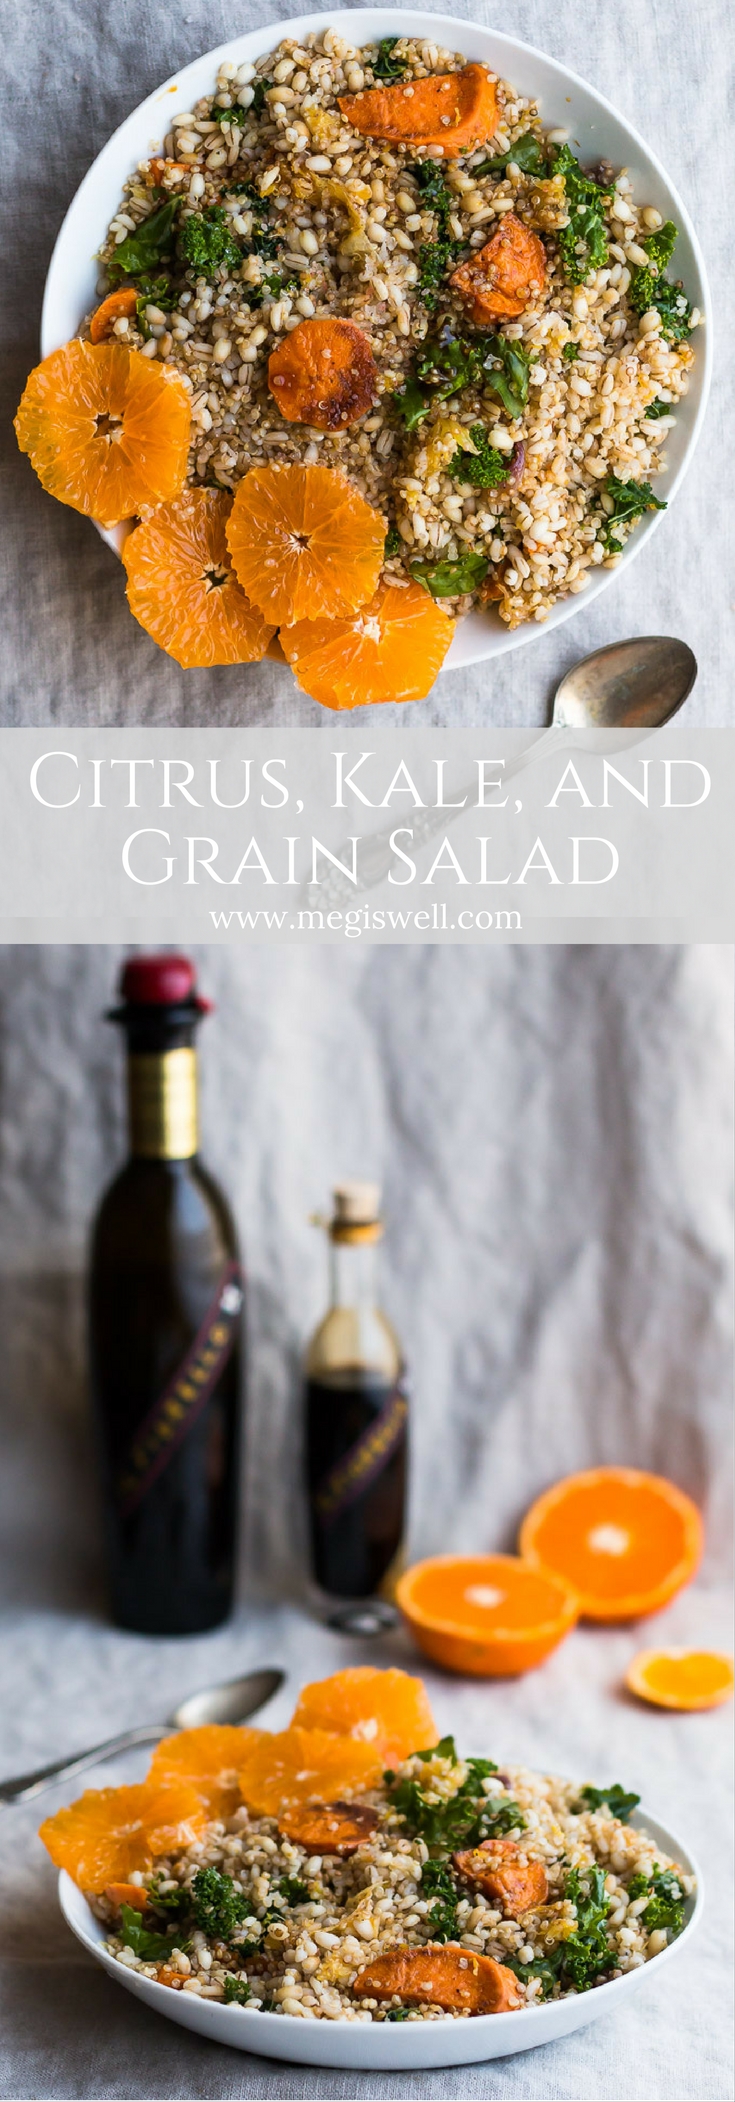 This Citrus, Kale, and Grain Salad is an amazing winter salad that is a combination of roasted oranges, red onion, and sweet potato-which provide sweet and fresh bursts of flavor, massaged kale, and roasted barley and quinoa, which adds depth and bulk. | www.megiswell.com